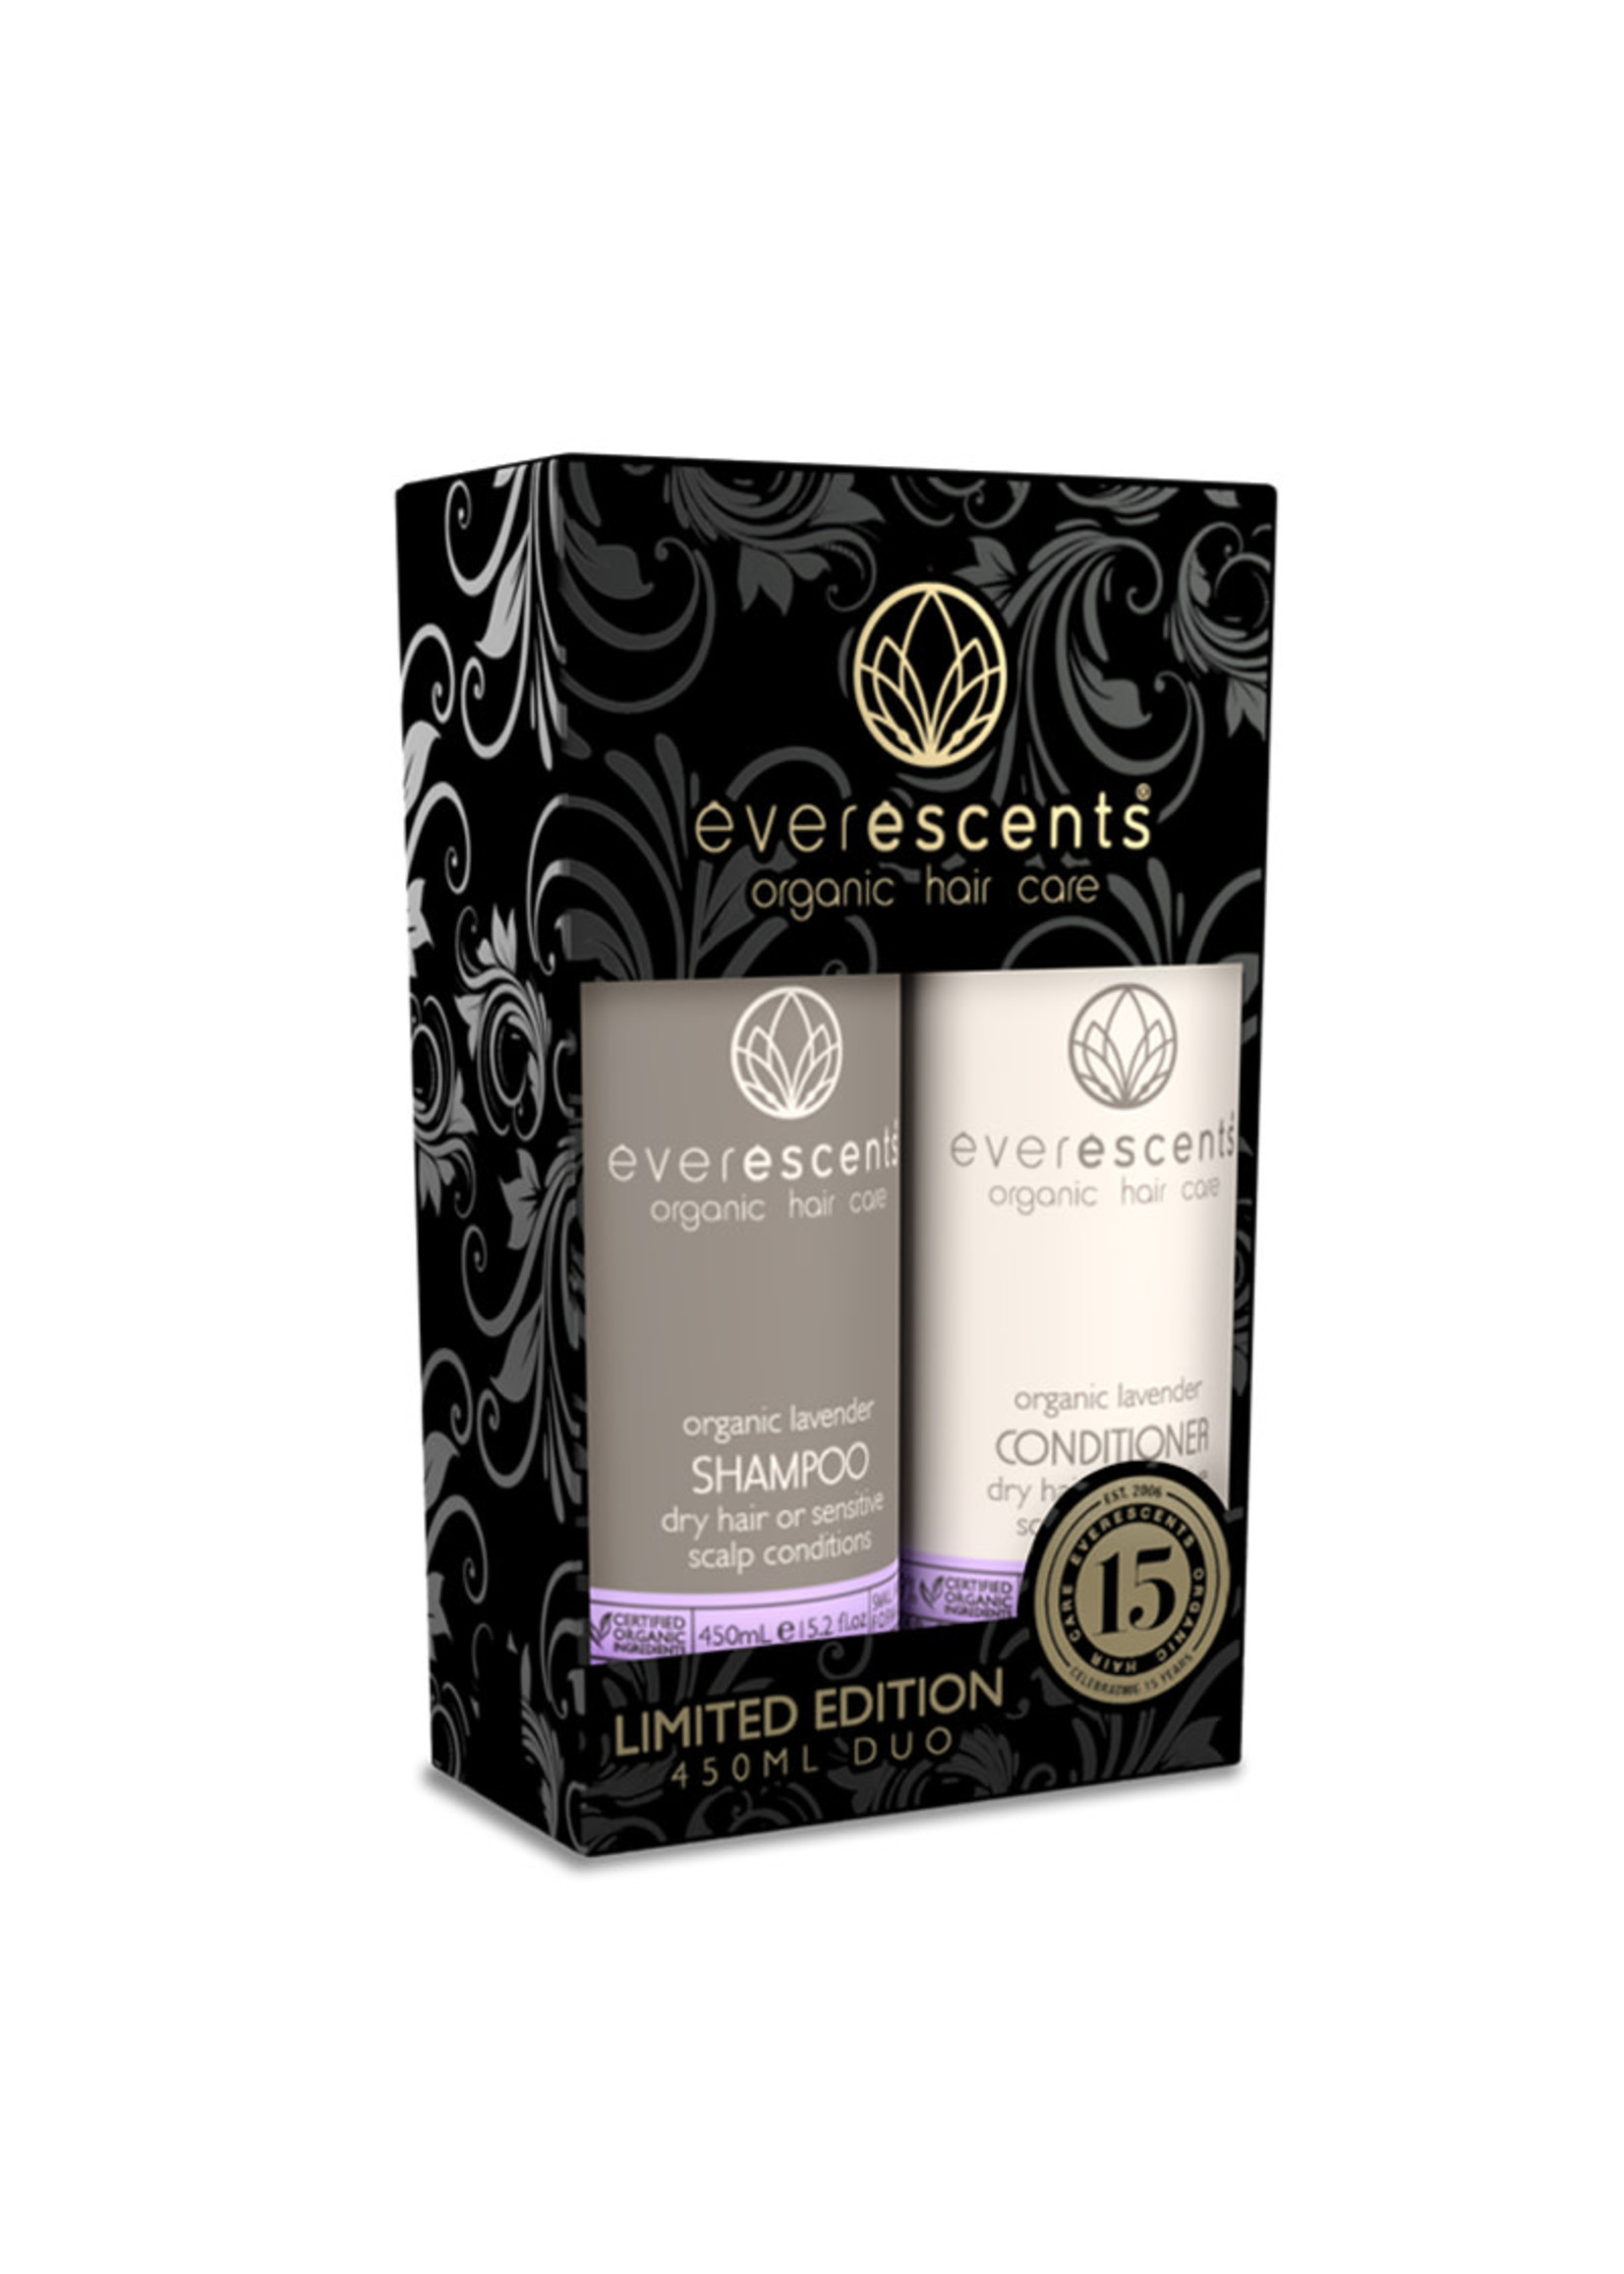 Everescents Everescents 450ml Duo Pack - Lavender